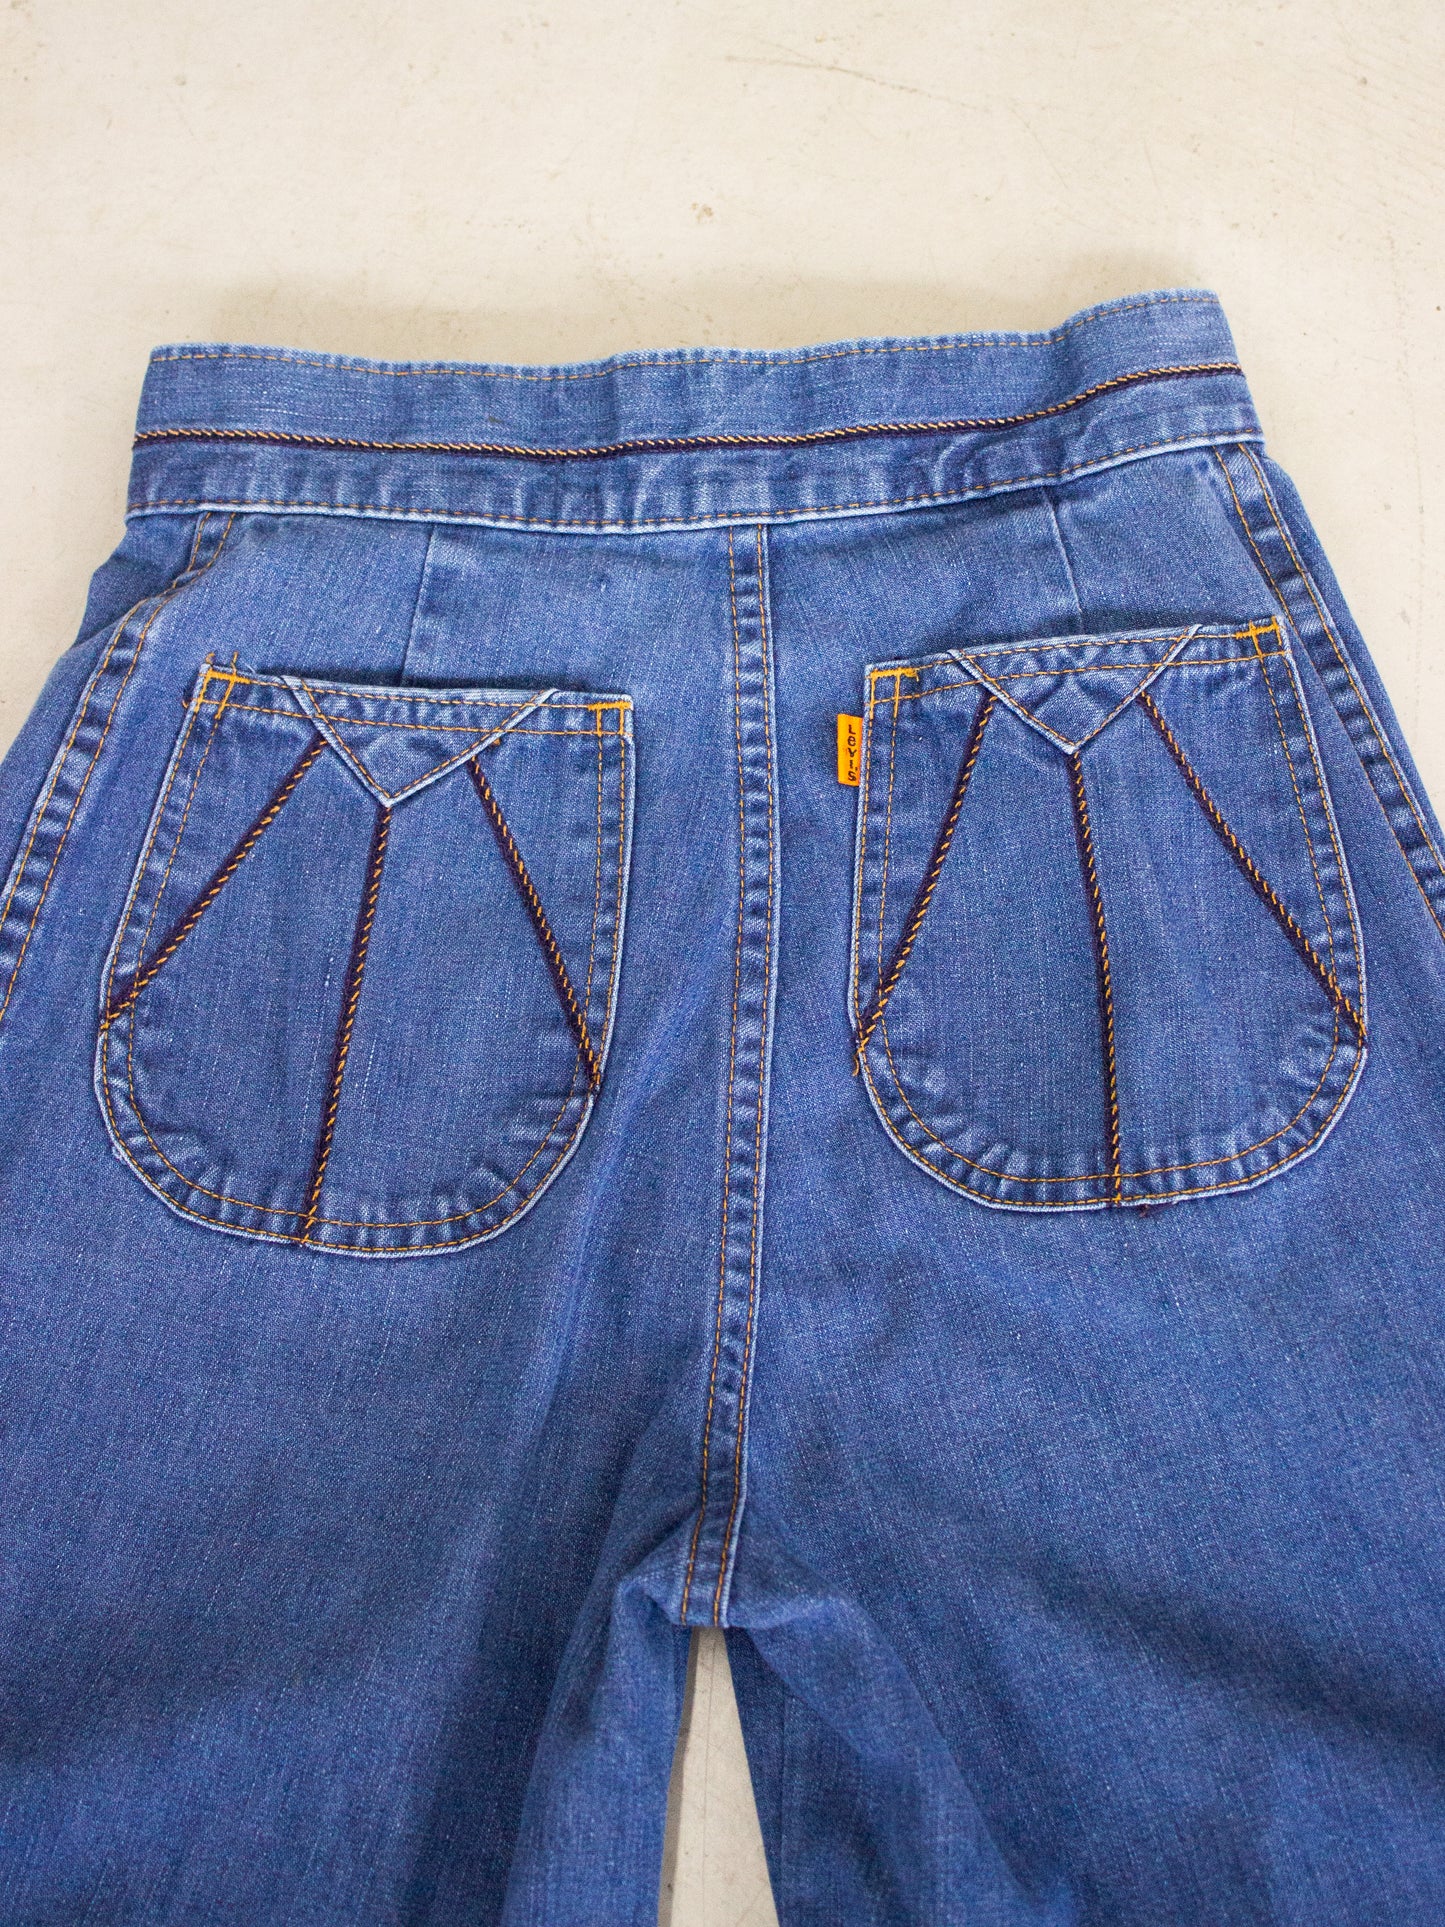 1970's Levis' Orange Tab Flared Jeans with Back Pocket Embroidery (Size 24-25)